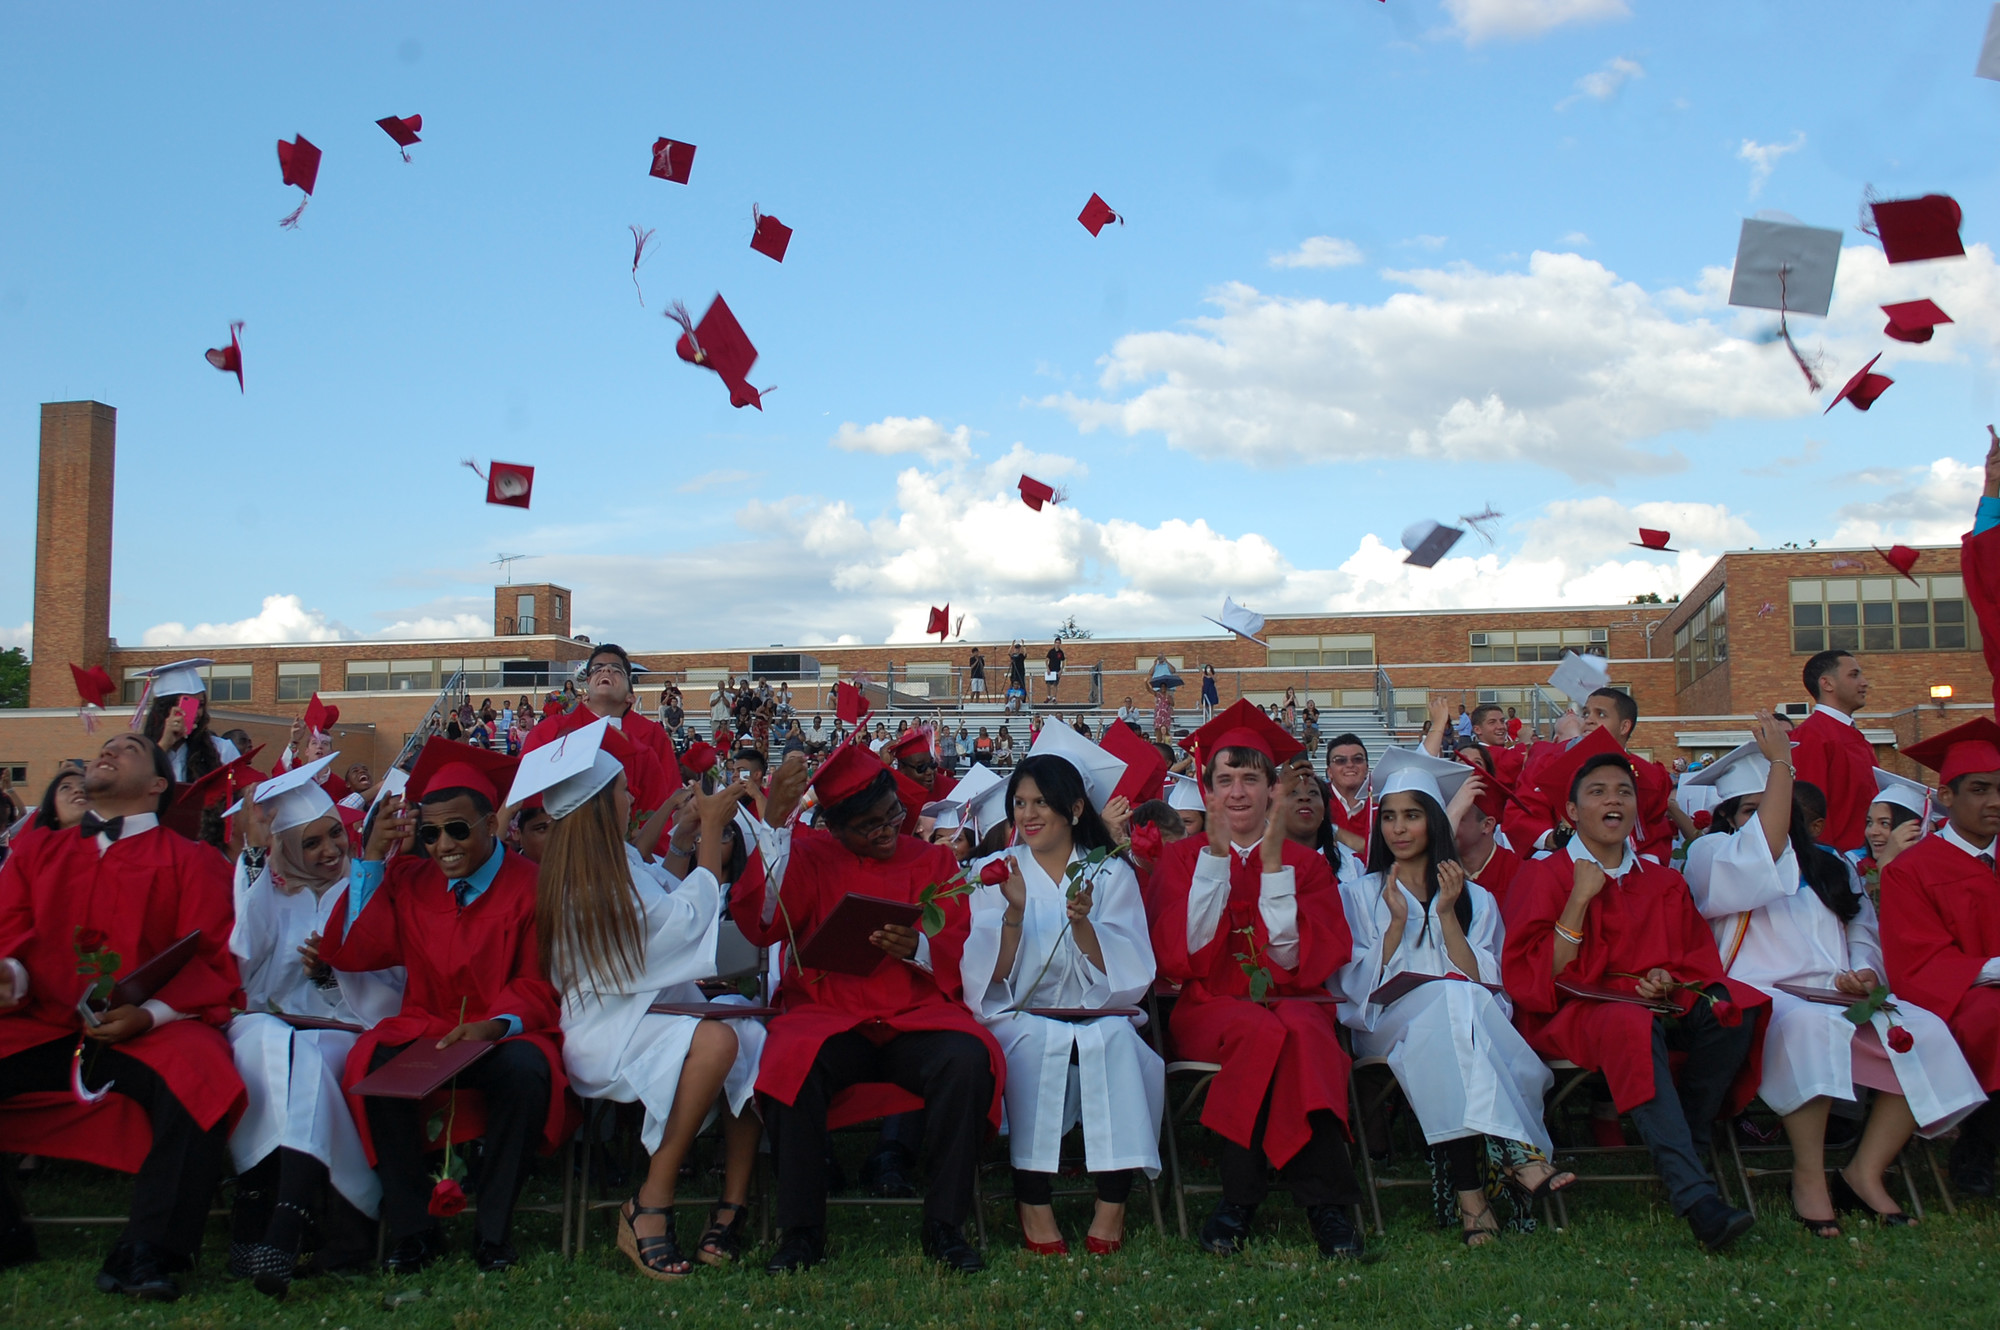 The 57th class to graduate from Valley Stream South High School fired their caps in the air as the ceremony came to a close on June 26.